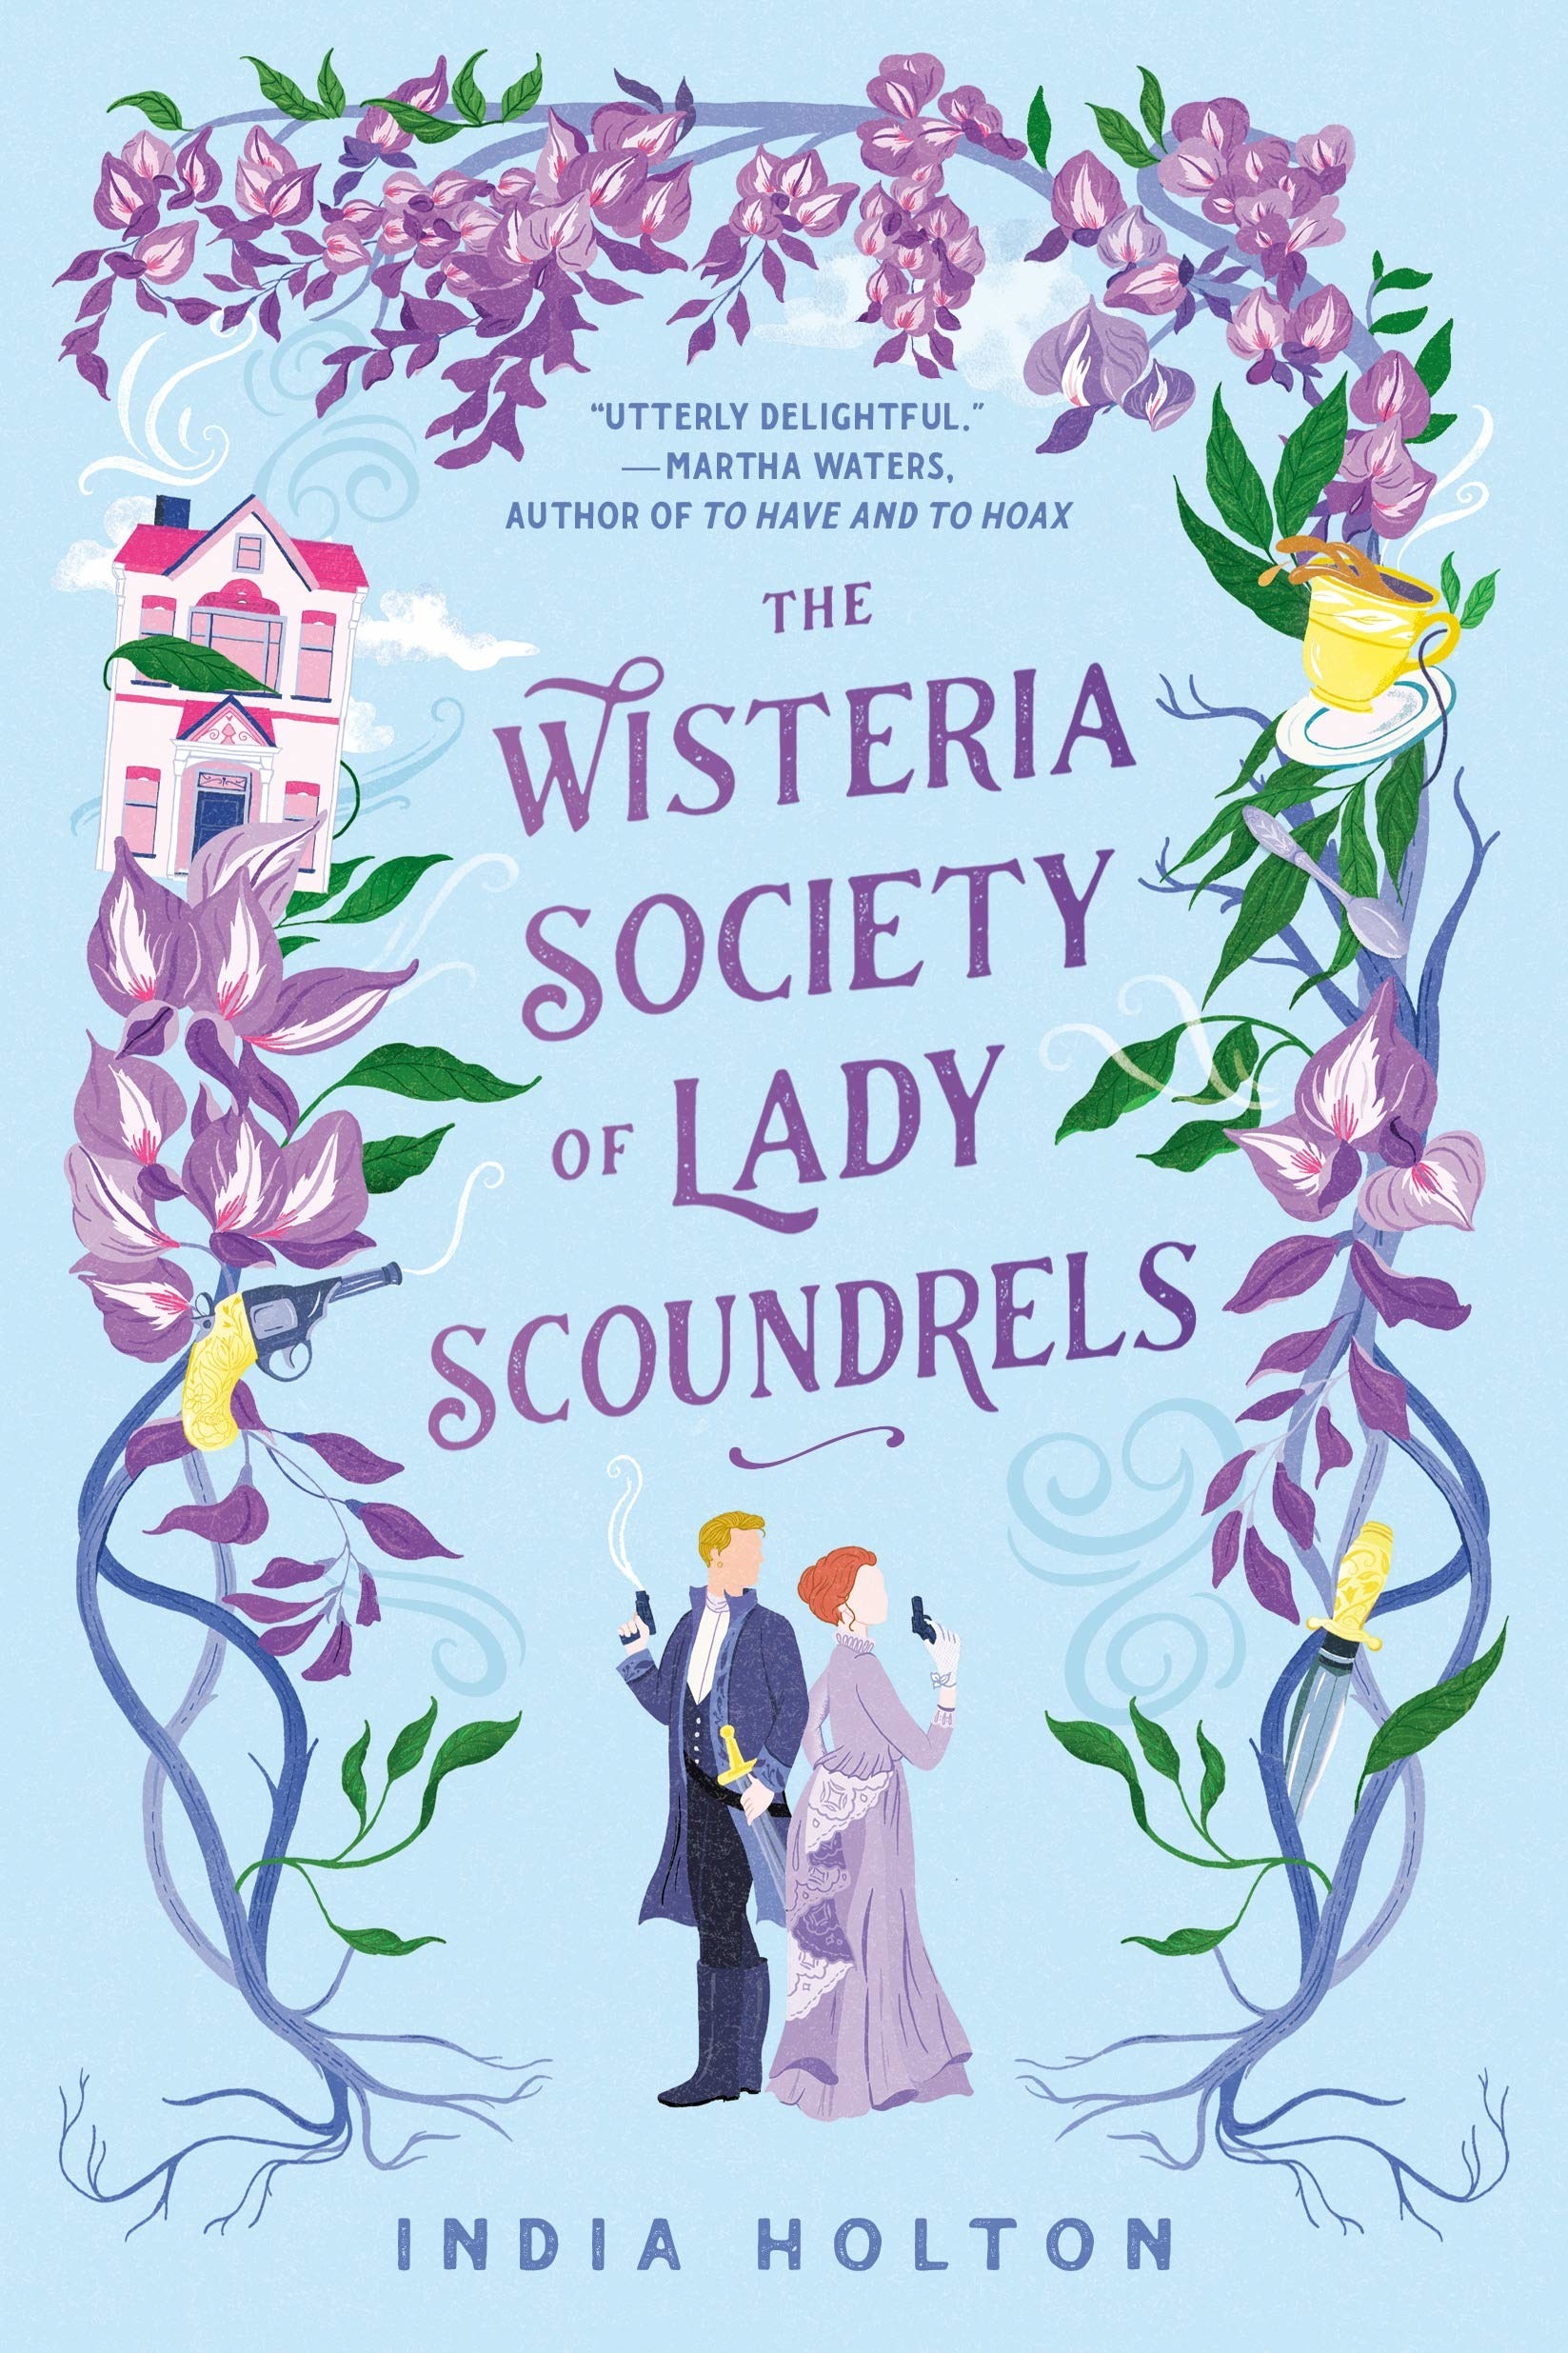 The Wisteria Society of Lady Scoundrels cover. Book by India Holton